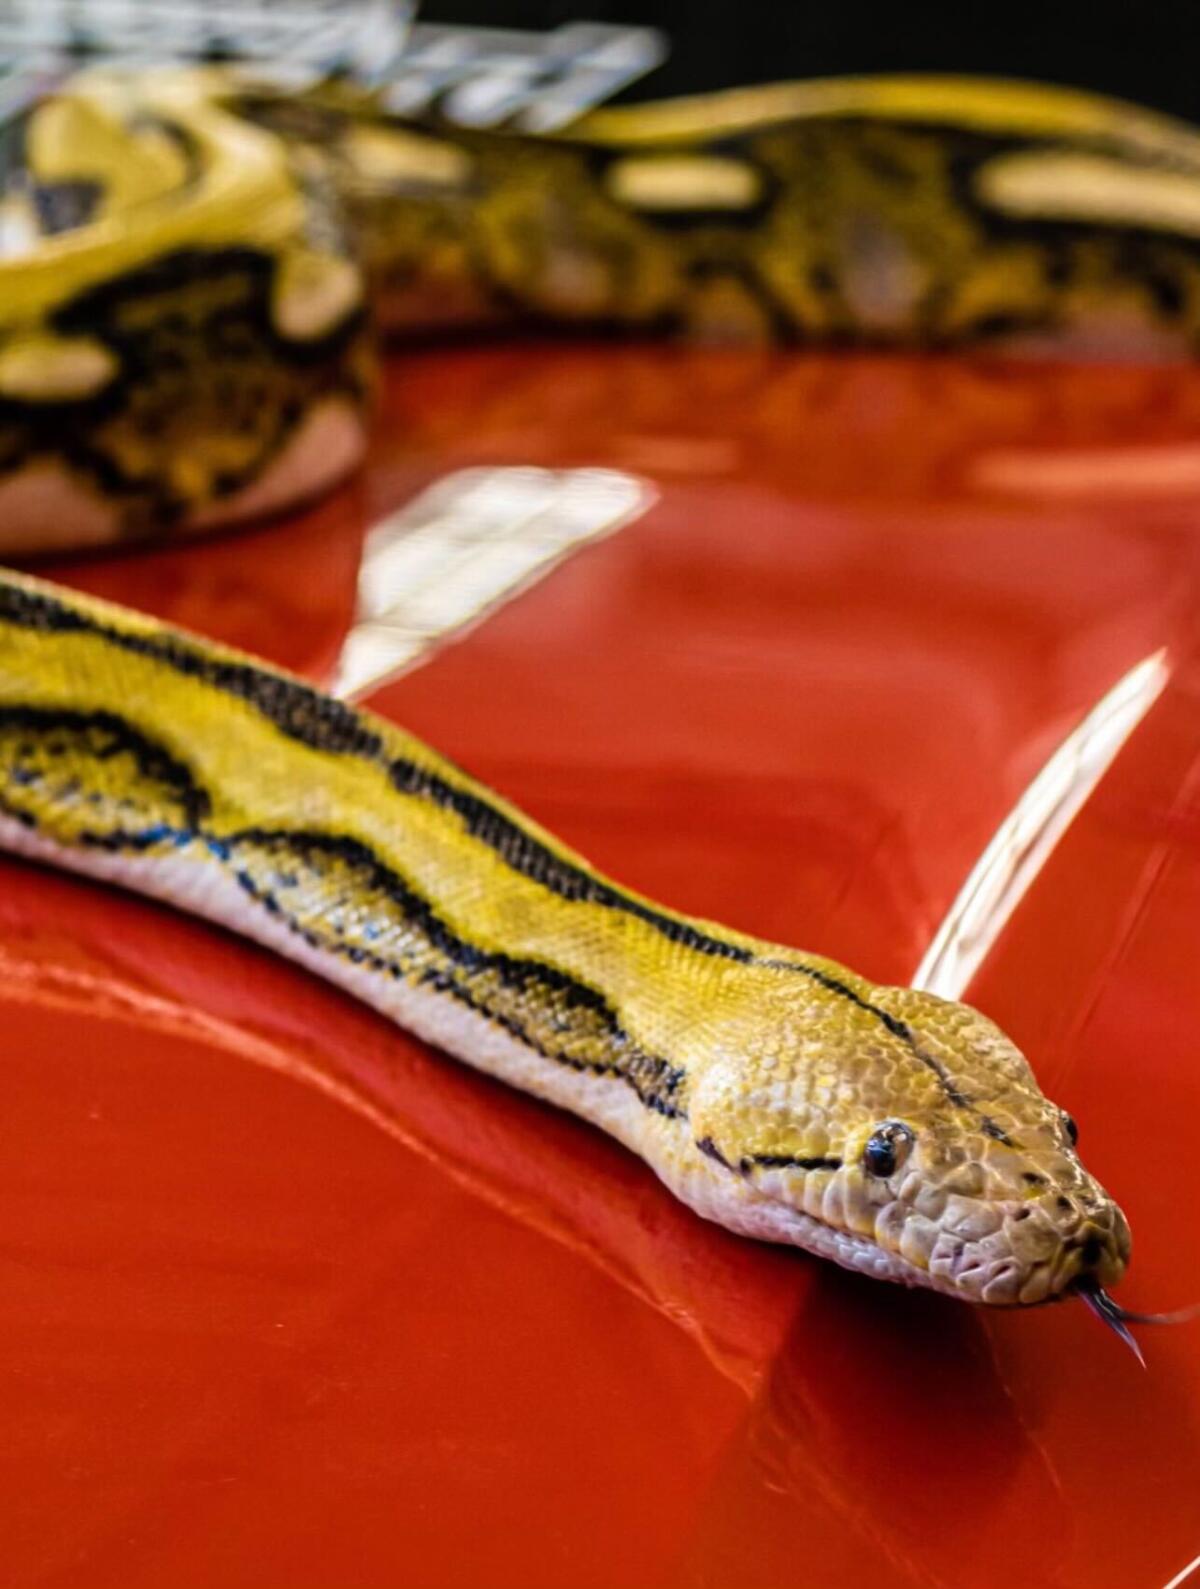 A python lies on a red surface